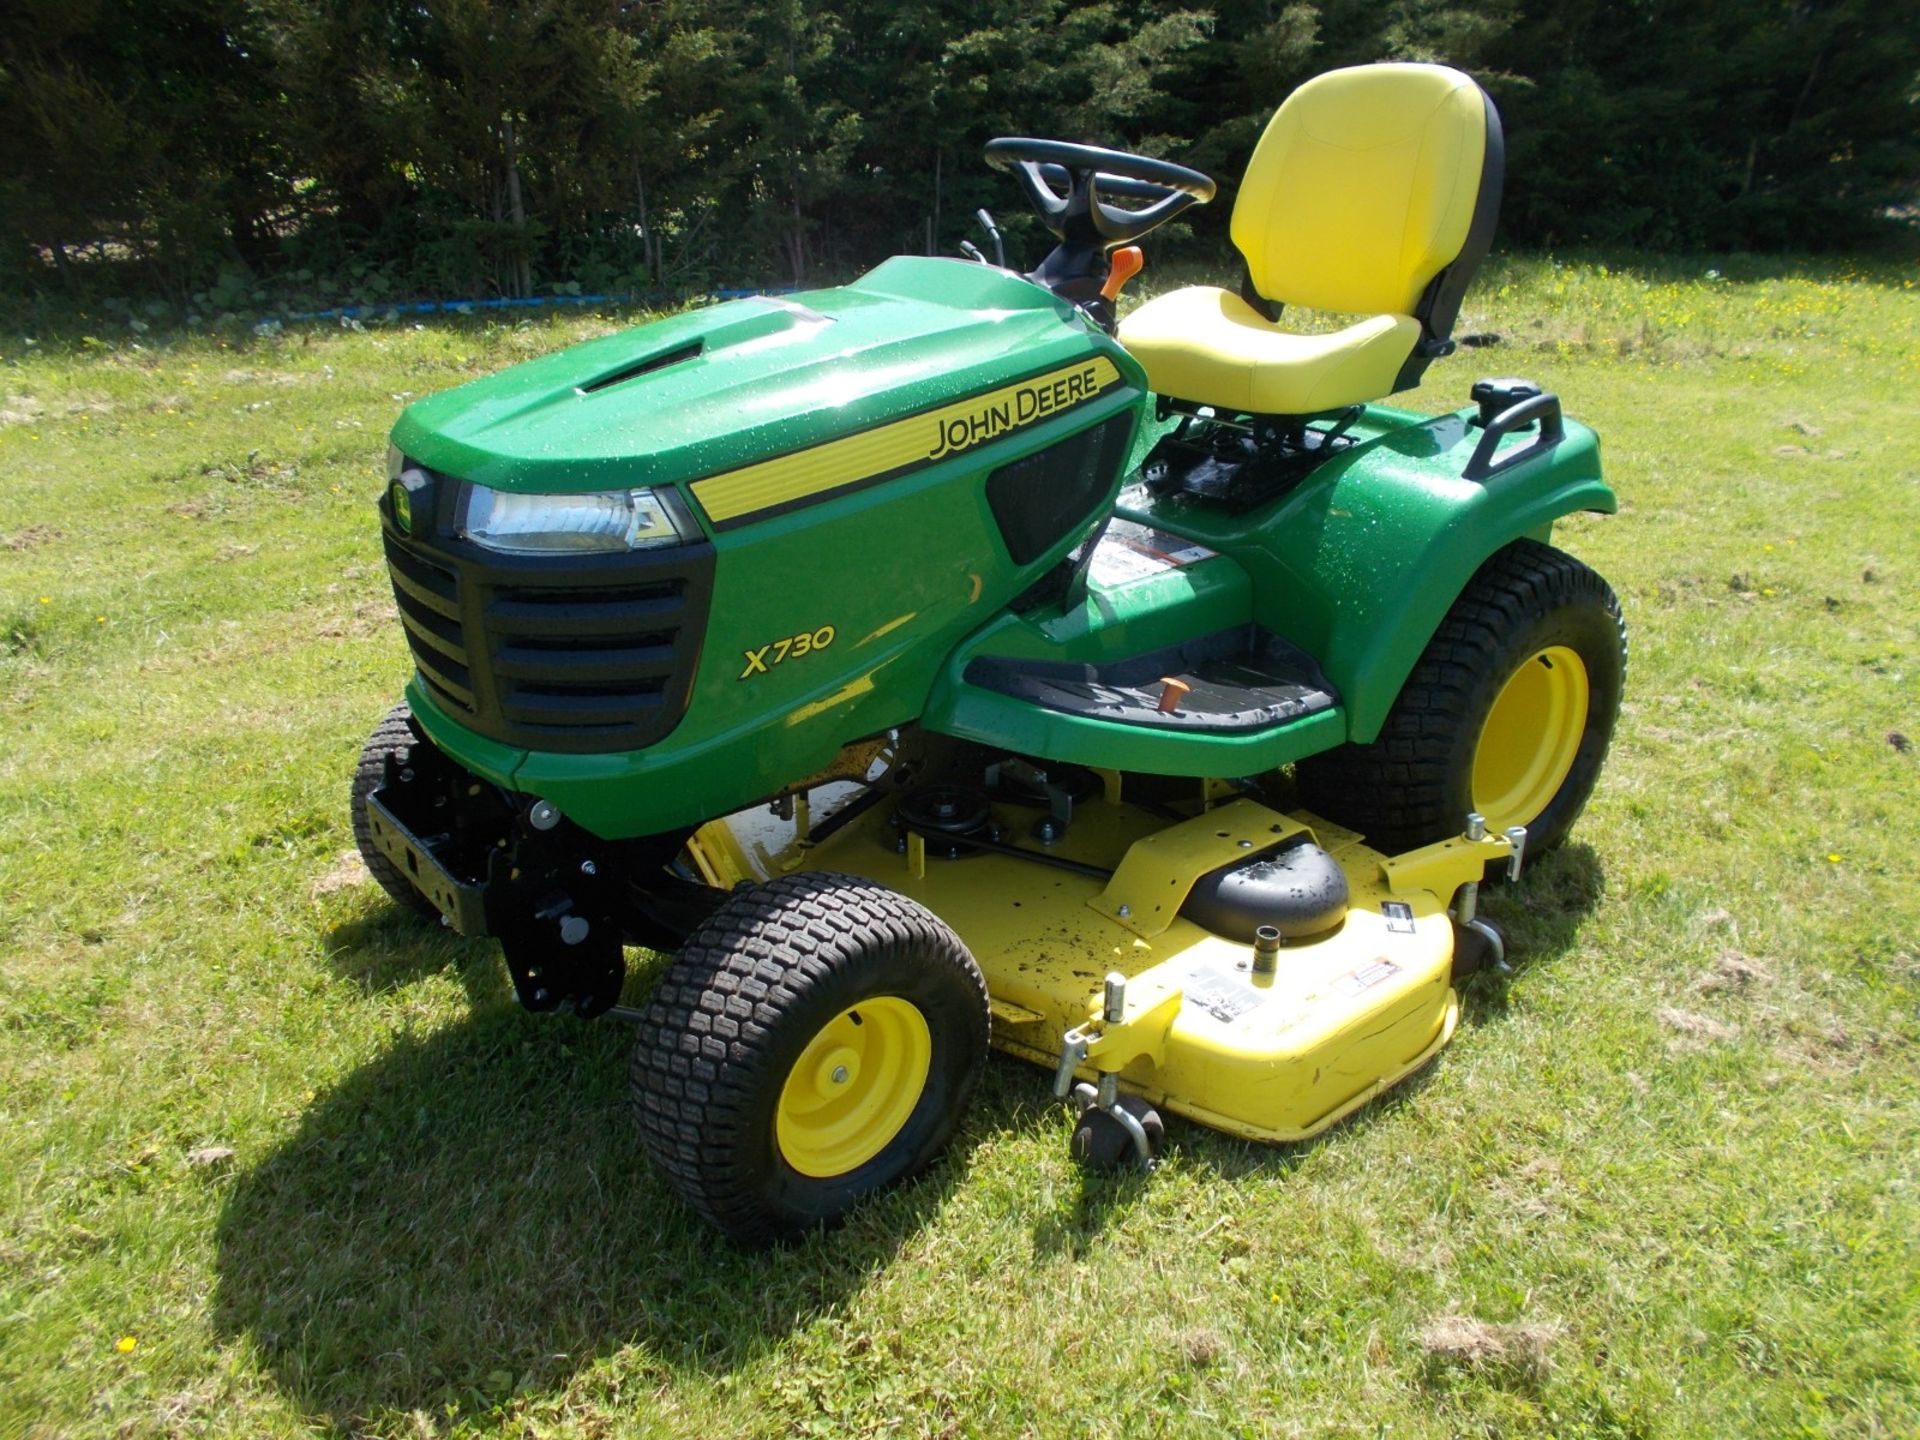 2018 JOHN DEERE X730 RIDE ON LAWN TRACTOR, 194 HOURS, 60” CUTTING DECK *PLUS VAT* - Image 3 of 20